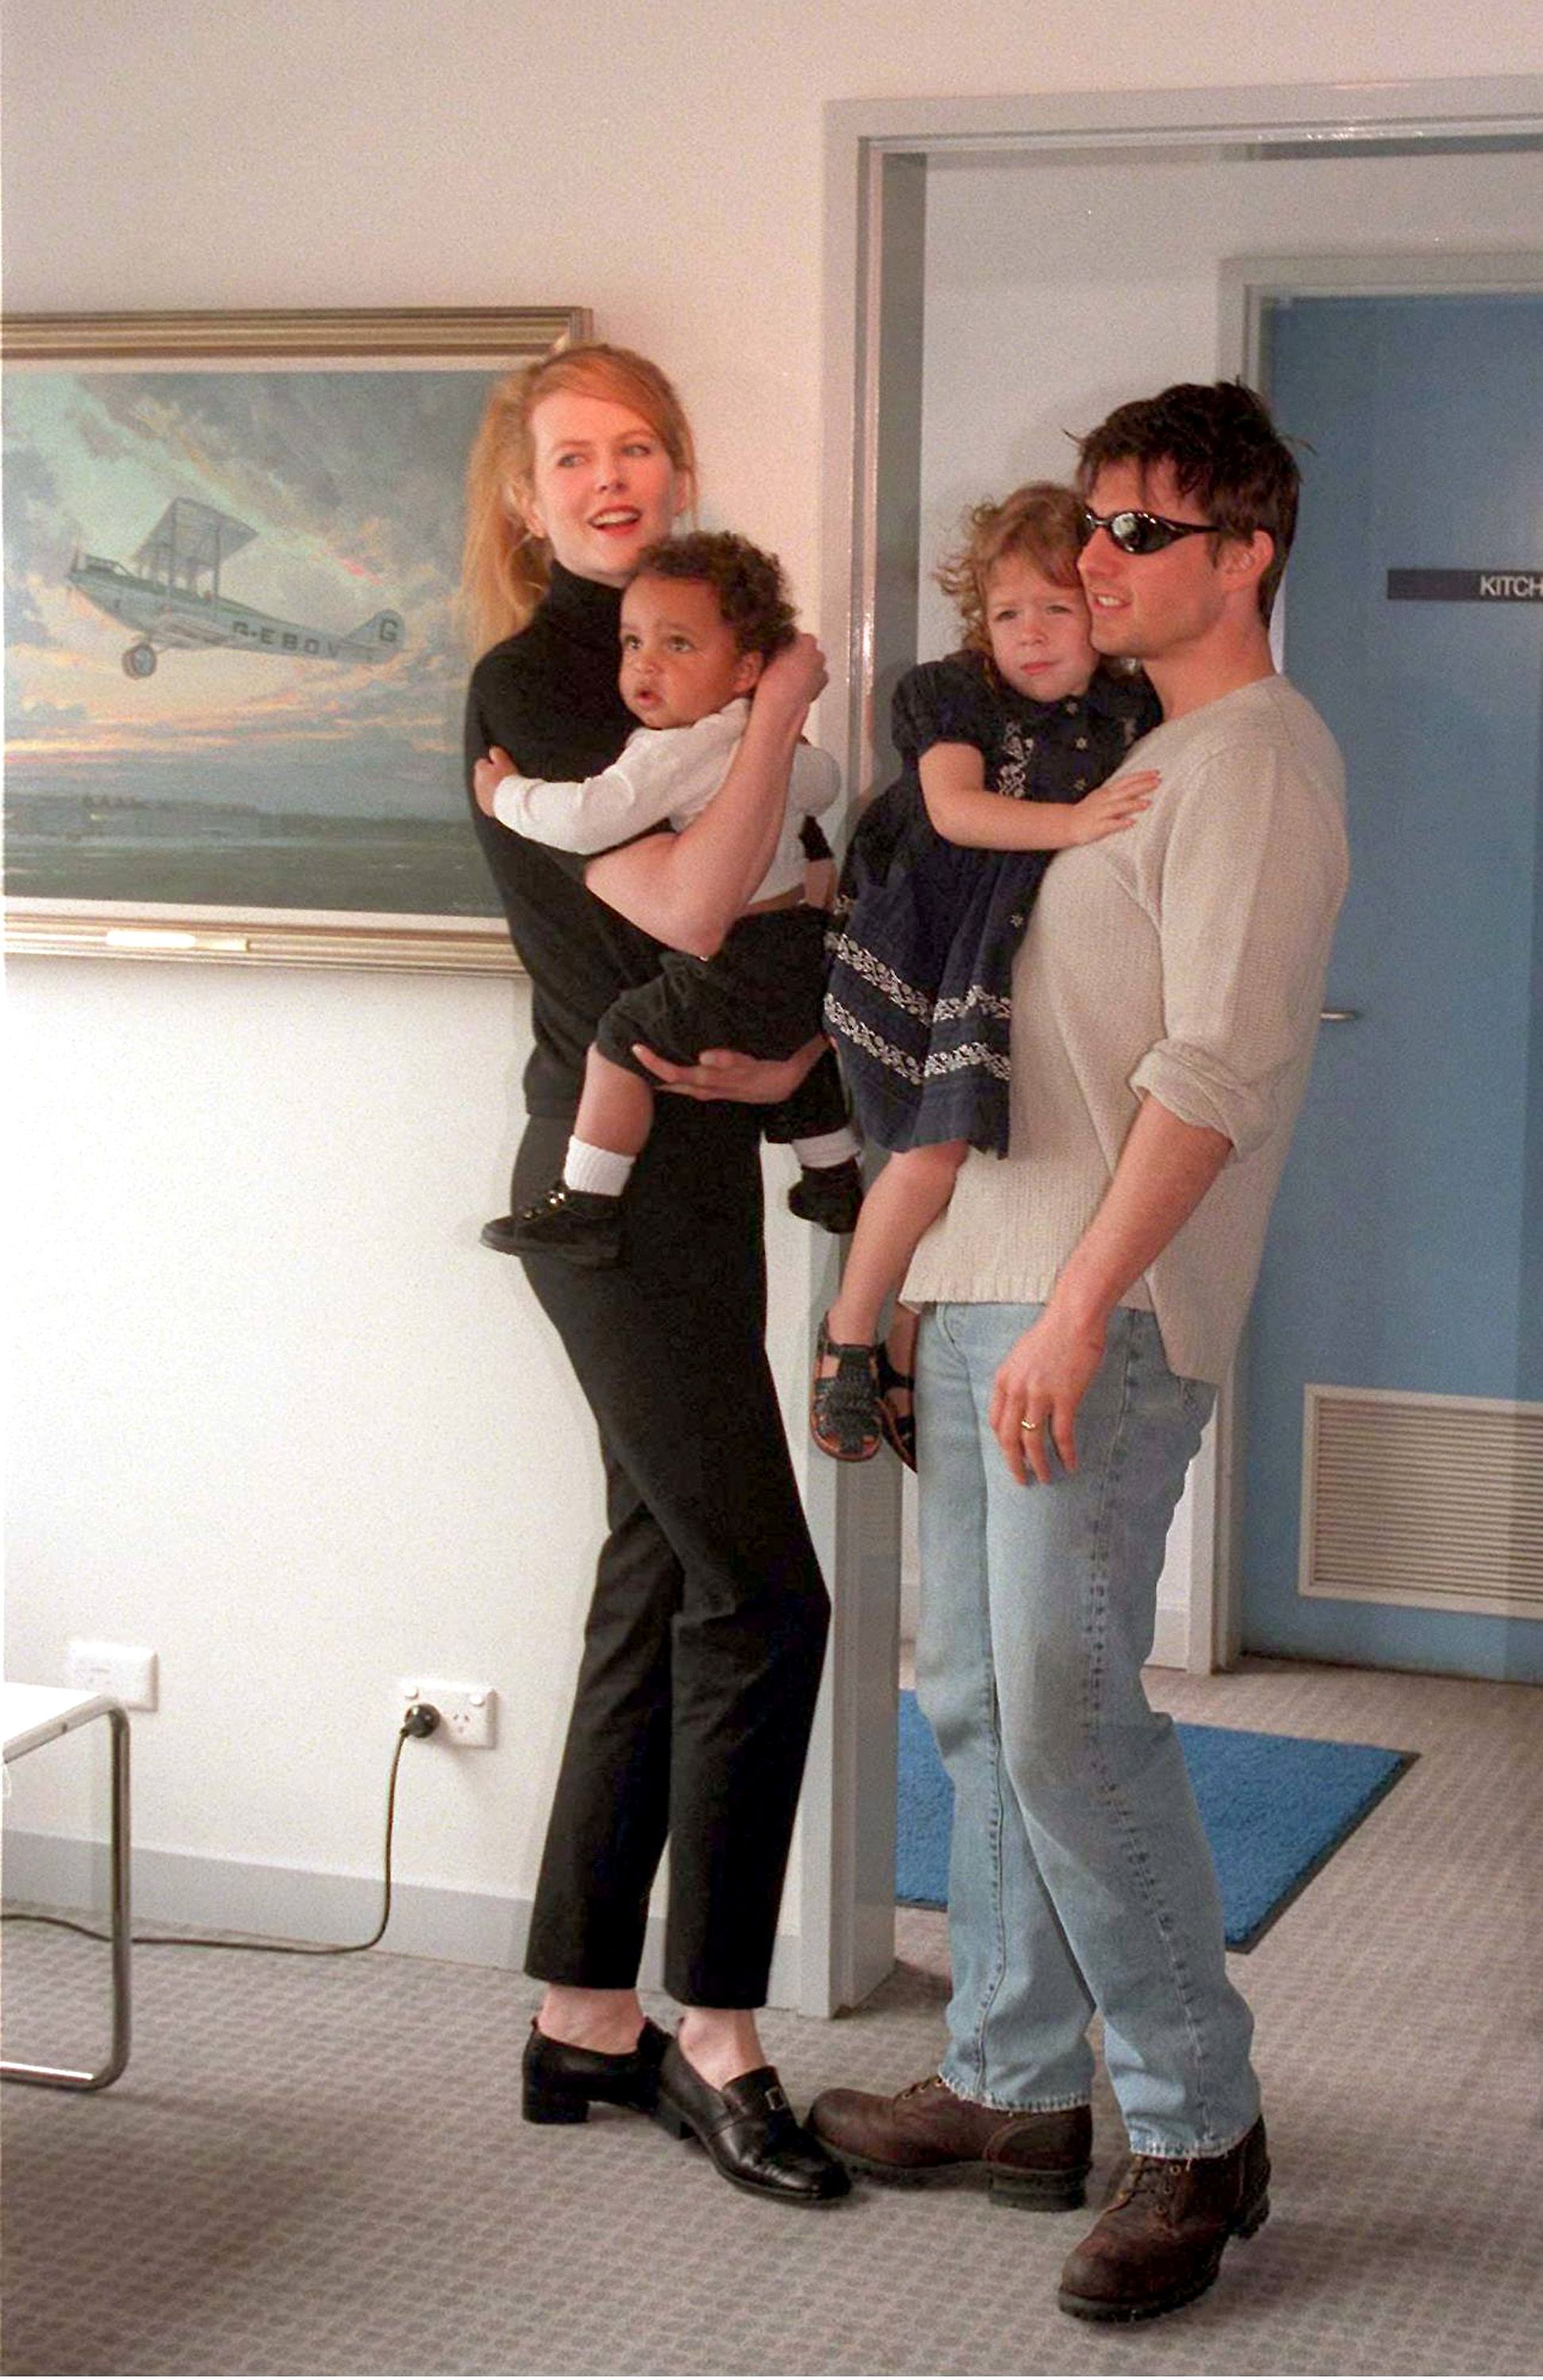 Nicole Kidman and Tom Cruise at Sydney Kingsford Smith airport with their children Connor and Isabella on January 24, 1996, in Sydney, Australia. | Source: Getty Images